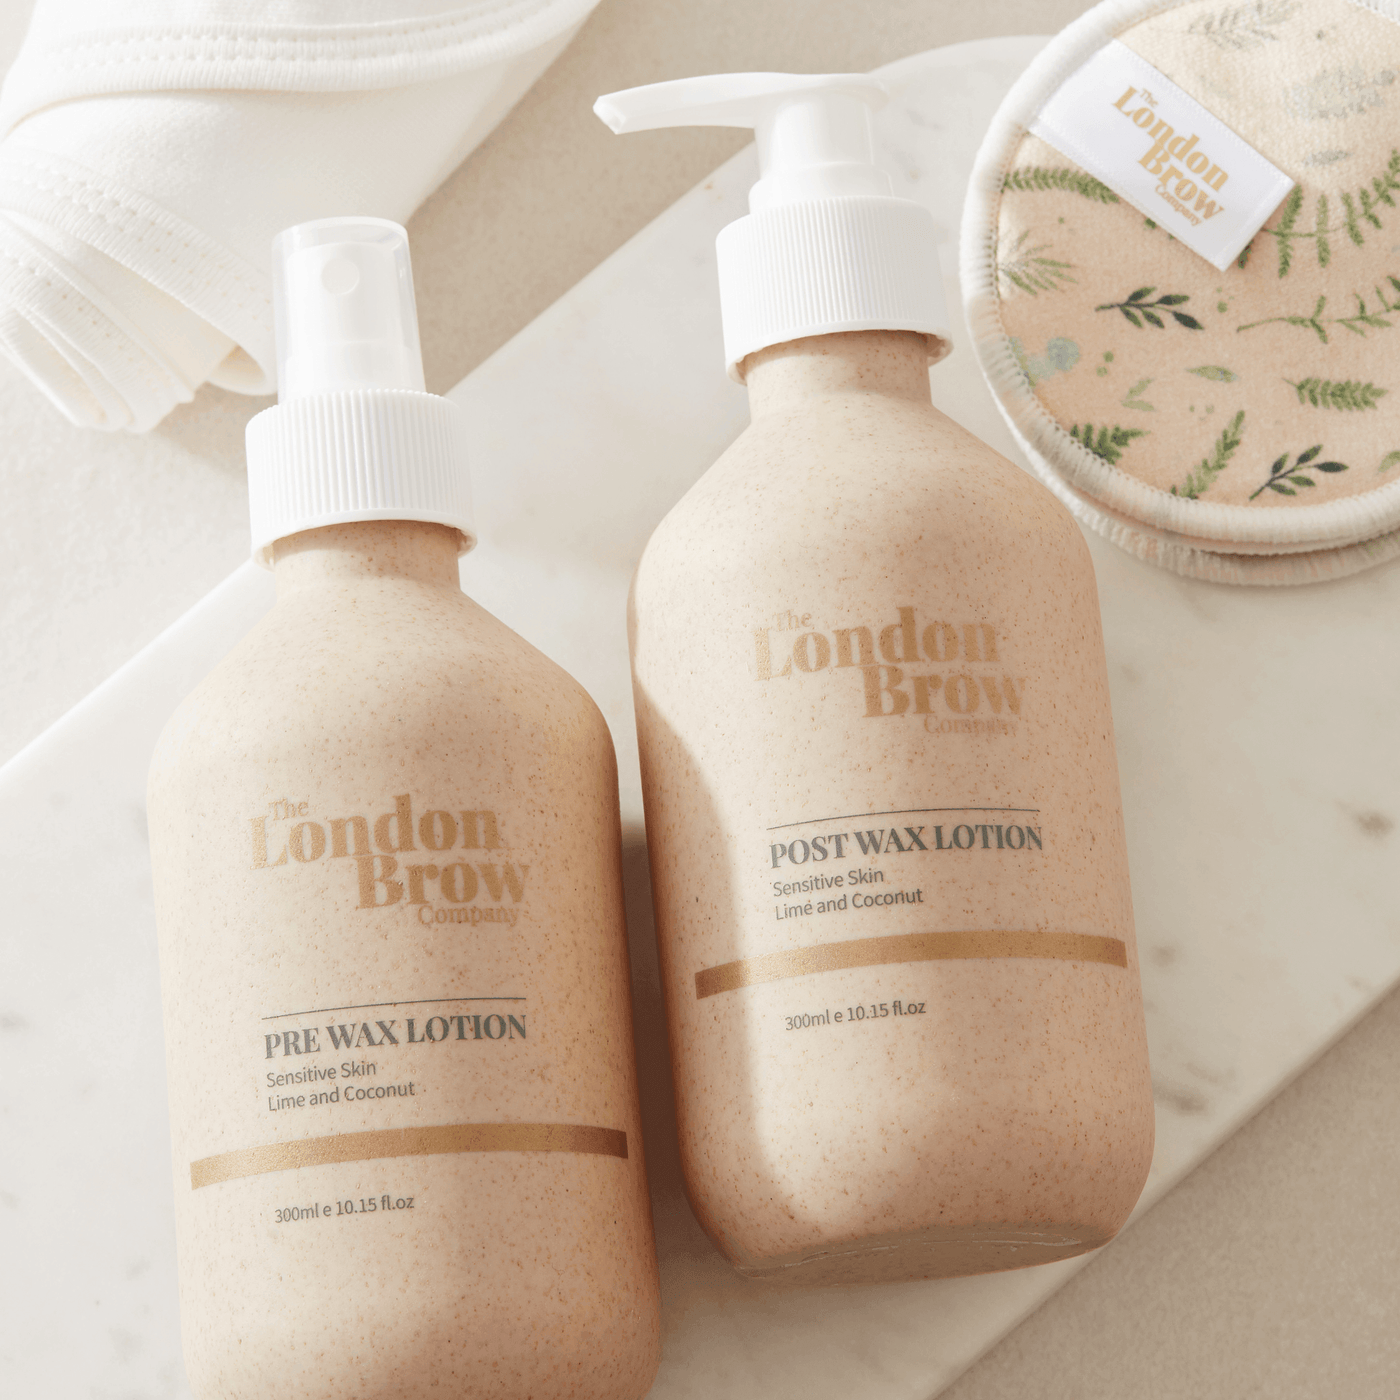 Pre Wax Cleanser and Post Wax Lotion - Set - The London Brow Company